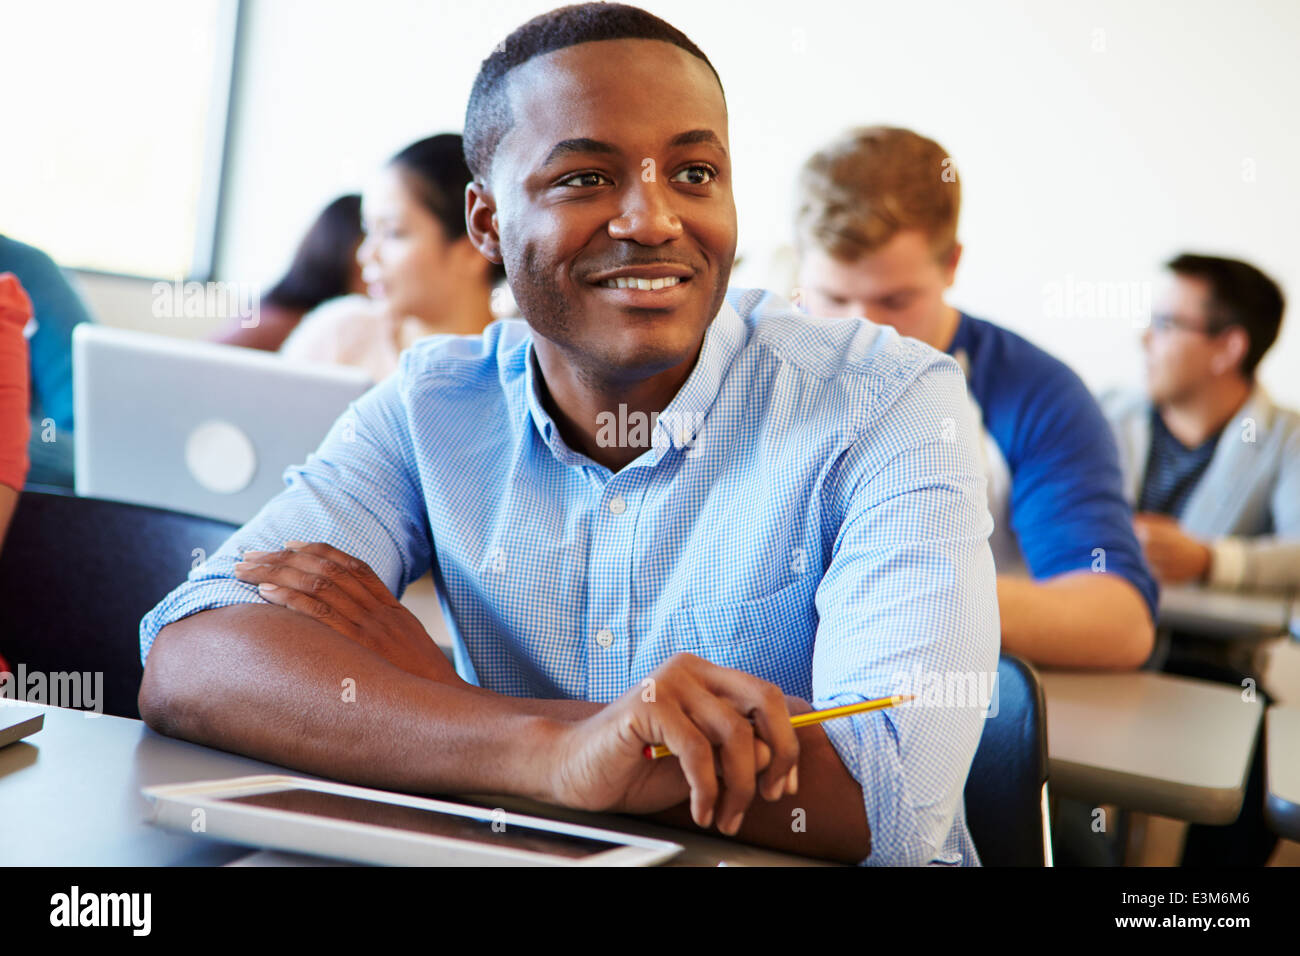 Male University Student Using Digital Tablet In Classroom Stock Photo